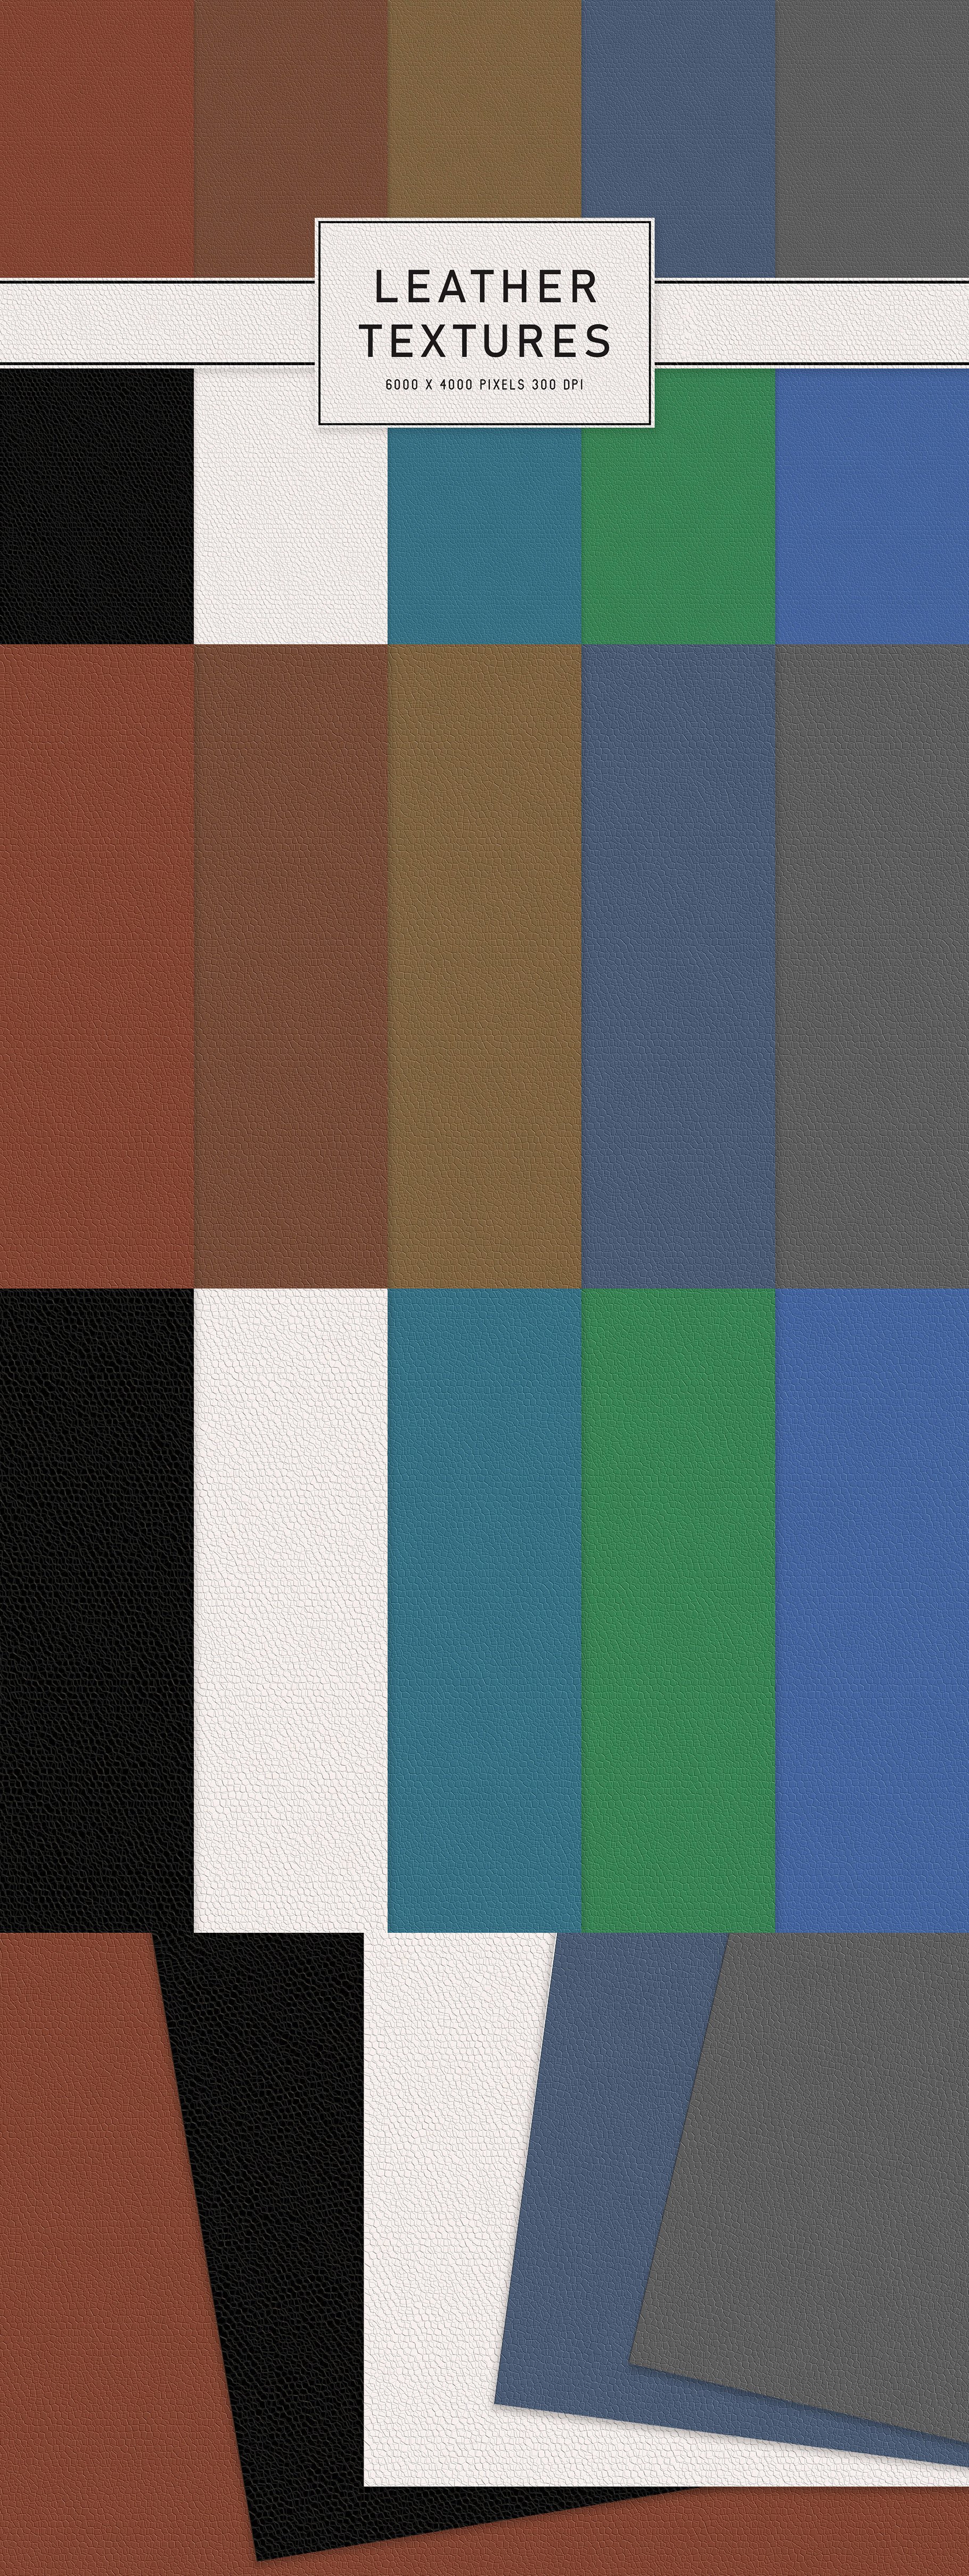 Leather Textures cover image.